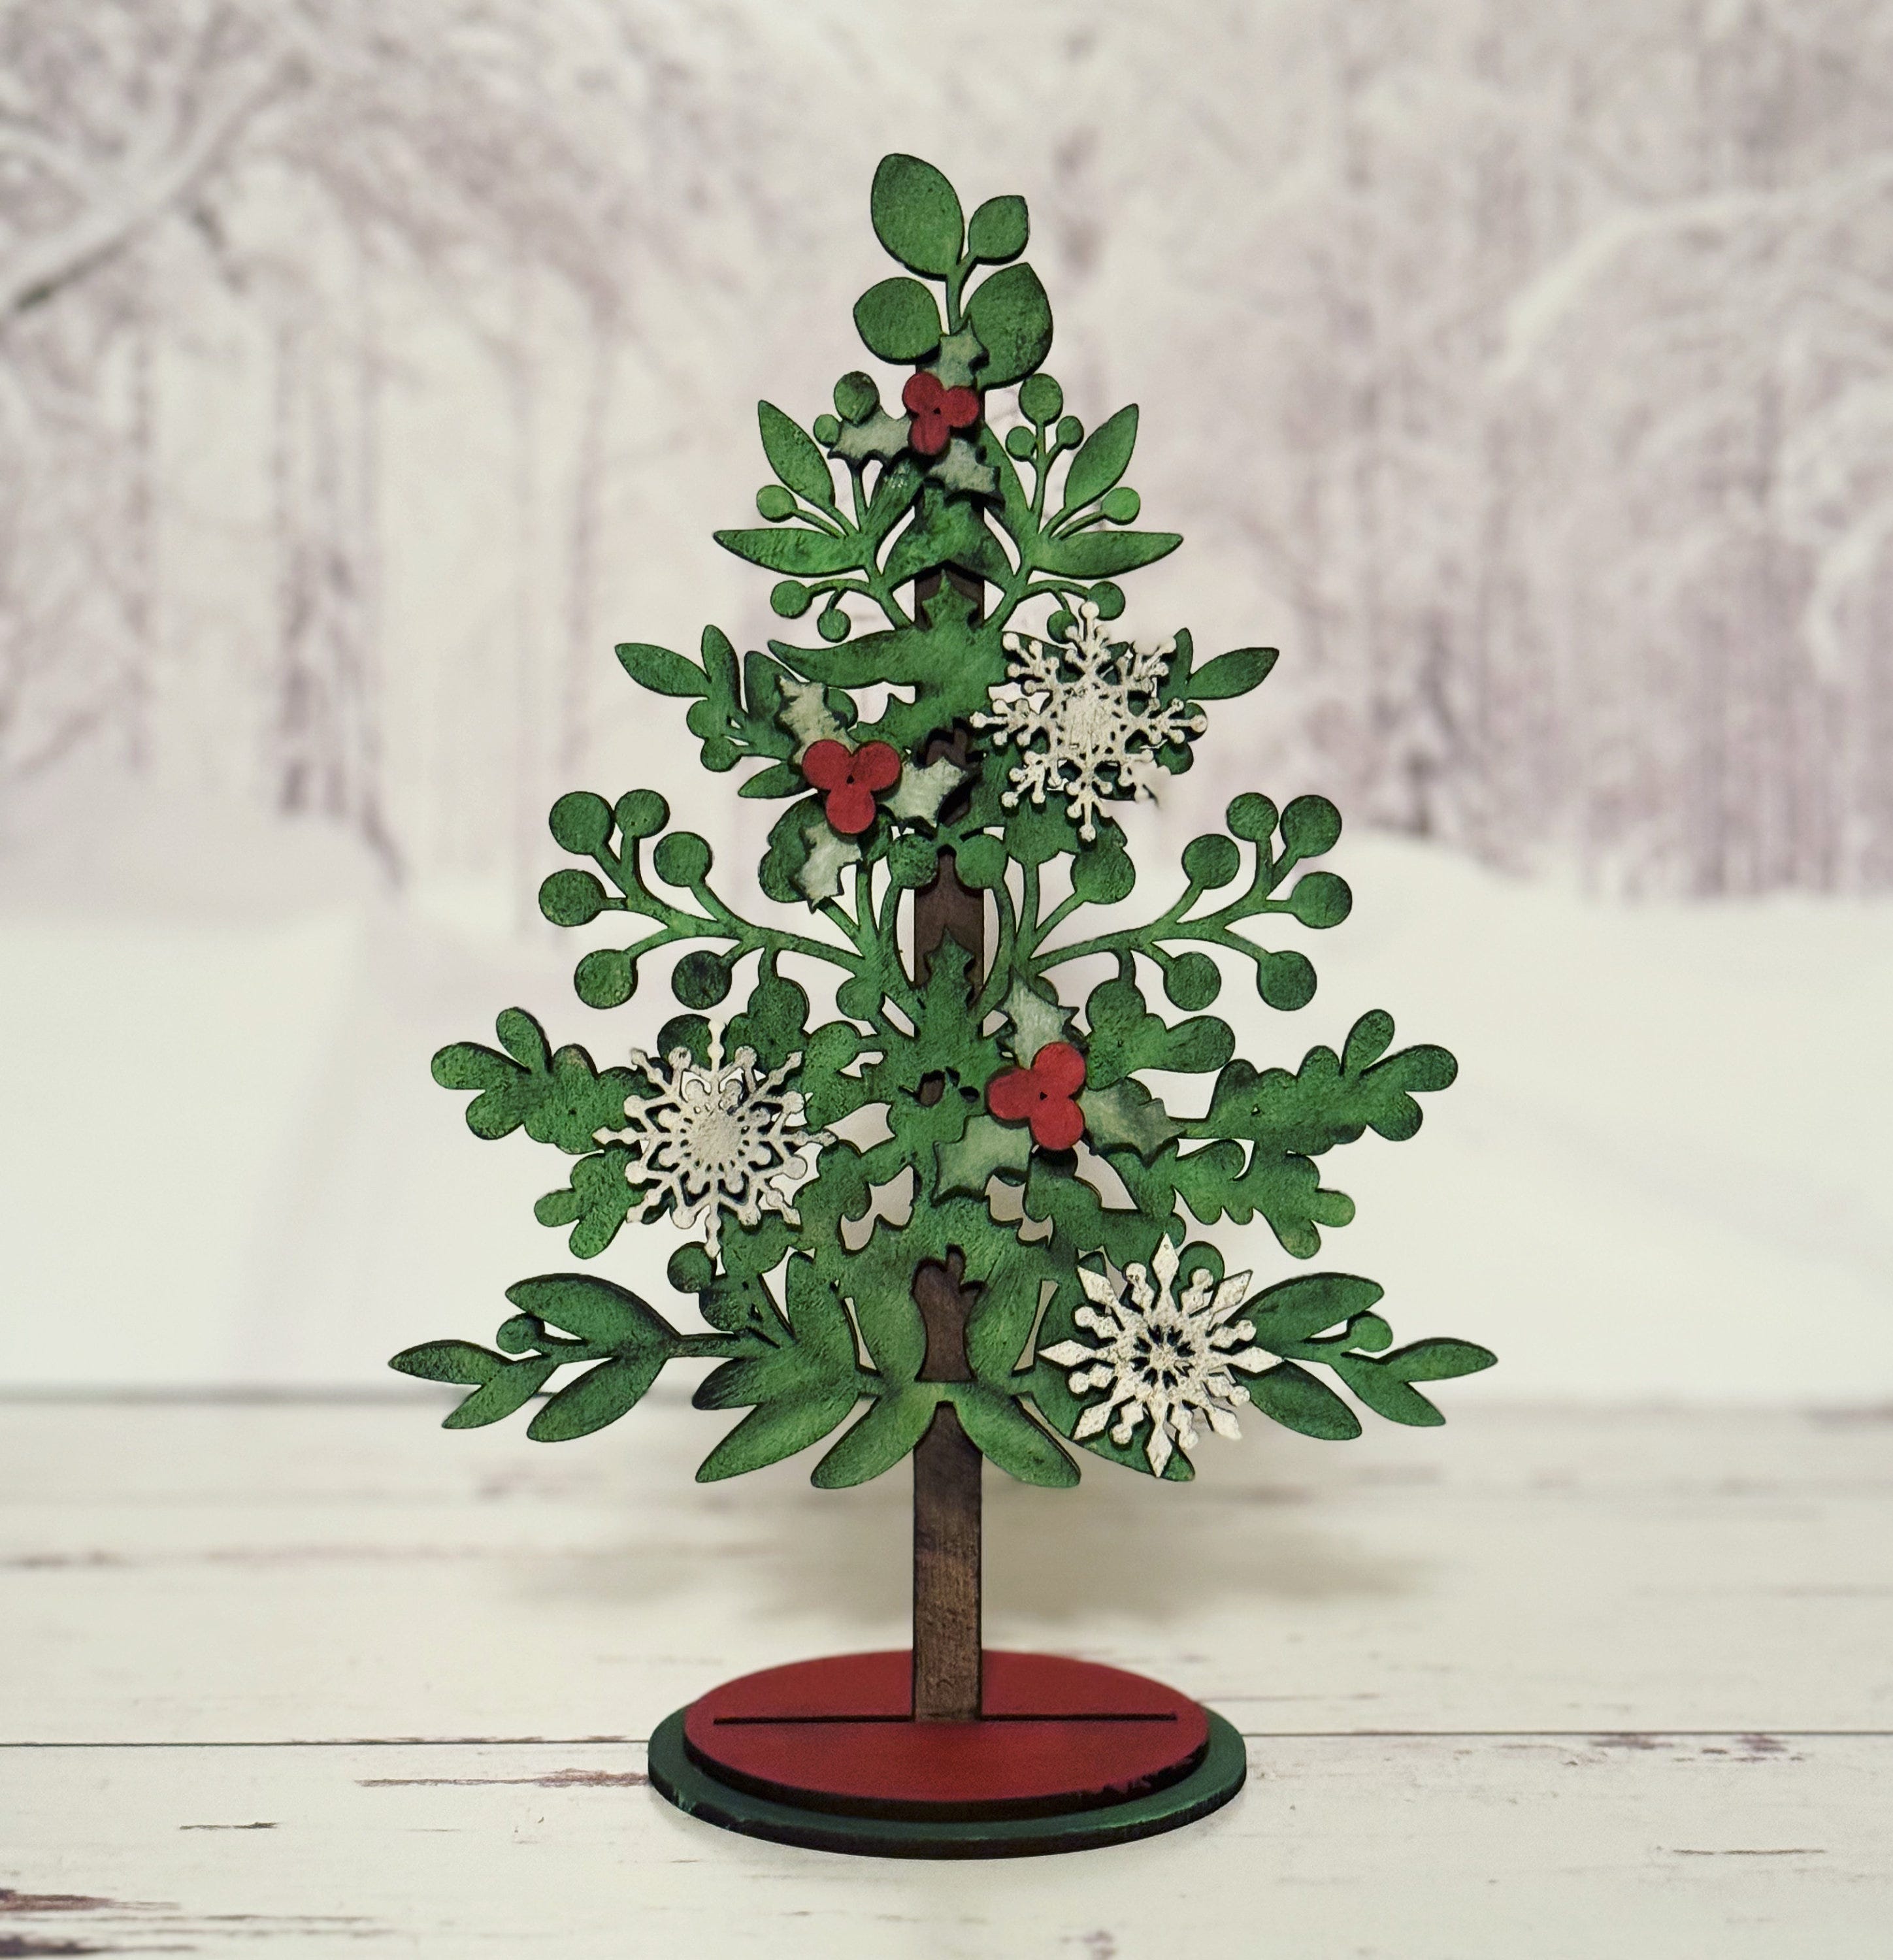 Floral Christmas Tree SVG Digital Download For Glowforge or Laser For 1/8” & 1/4” Material Not a Physical Item Read Item Details